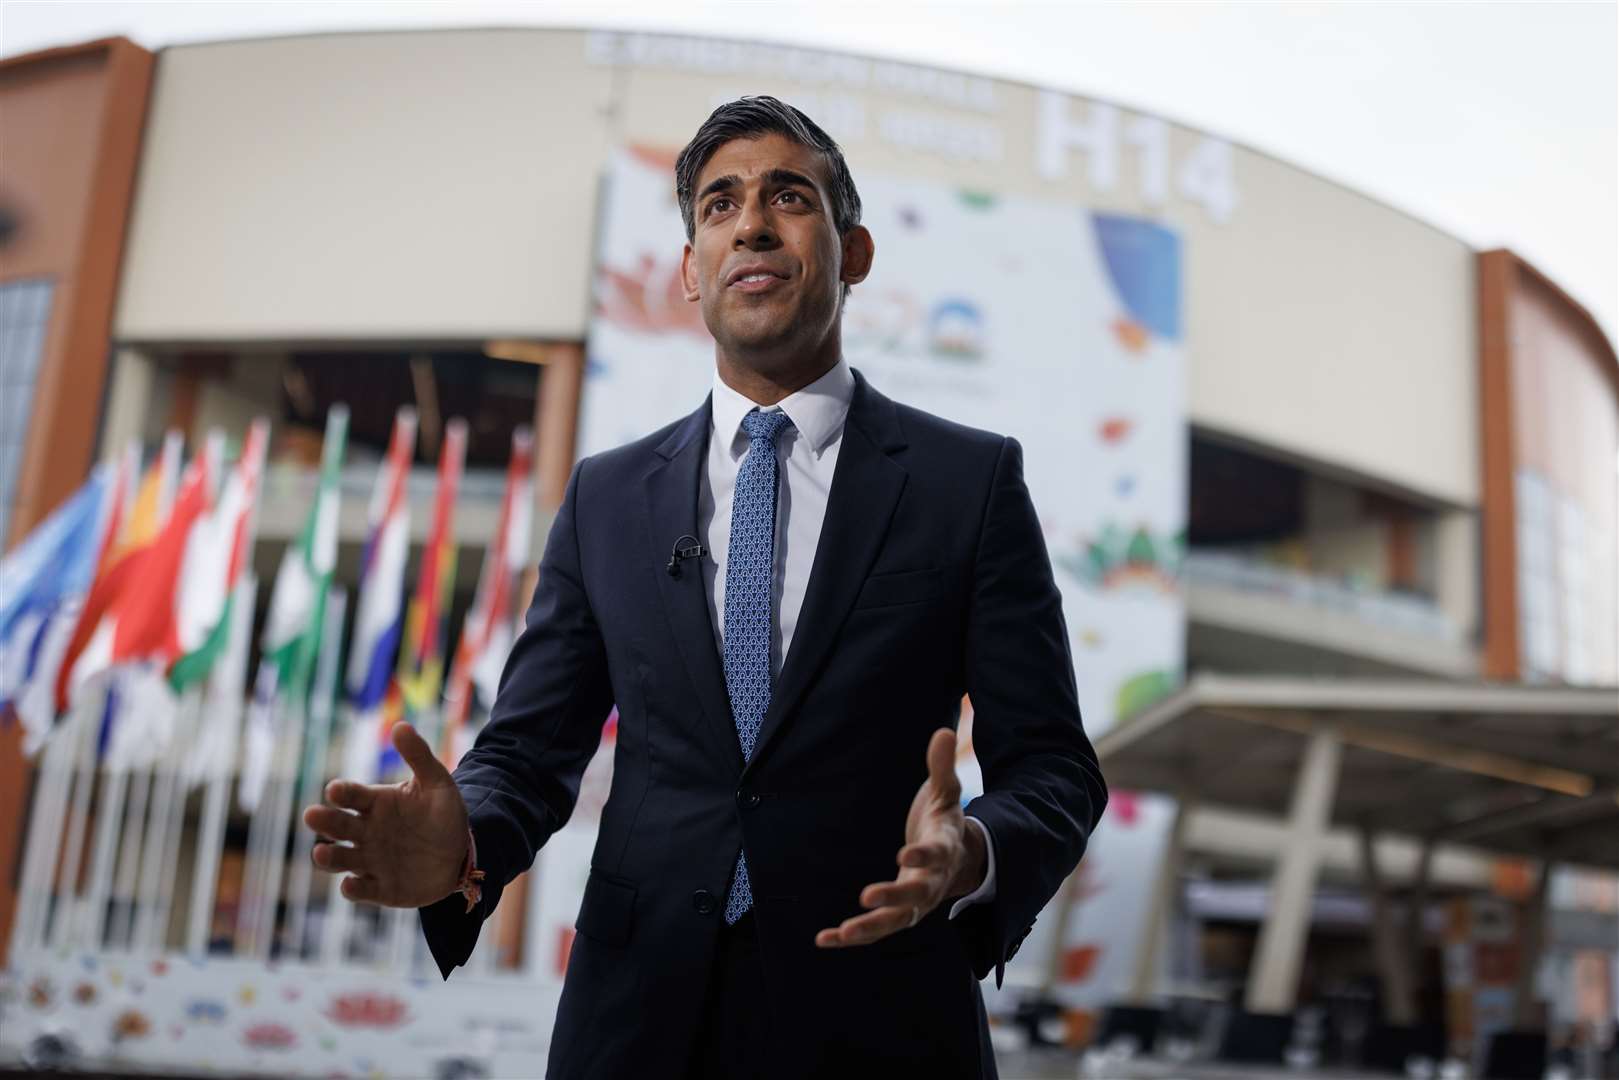 Rishi Sunak will later take part in the final session of the summit, called One Future, where the focus will be on transformative technologies, before flying back to the UK (Dan Kitwood/PA)